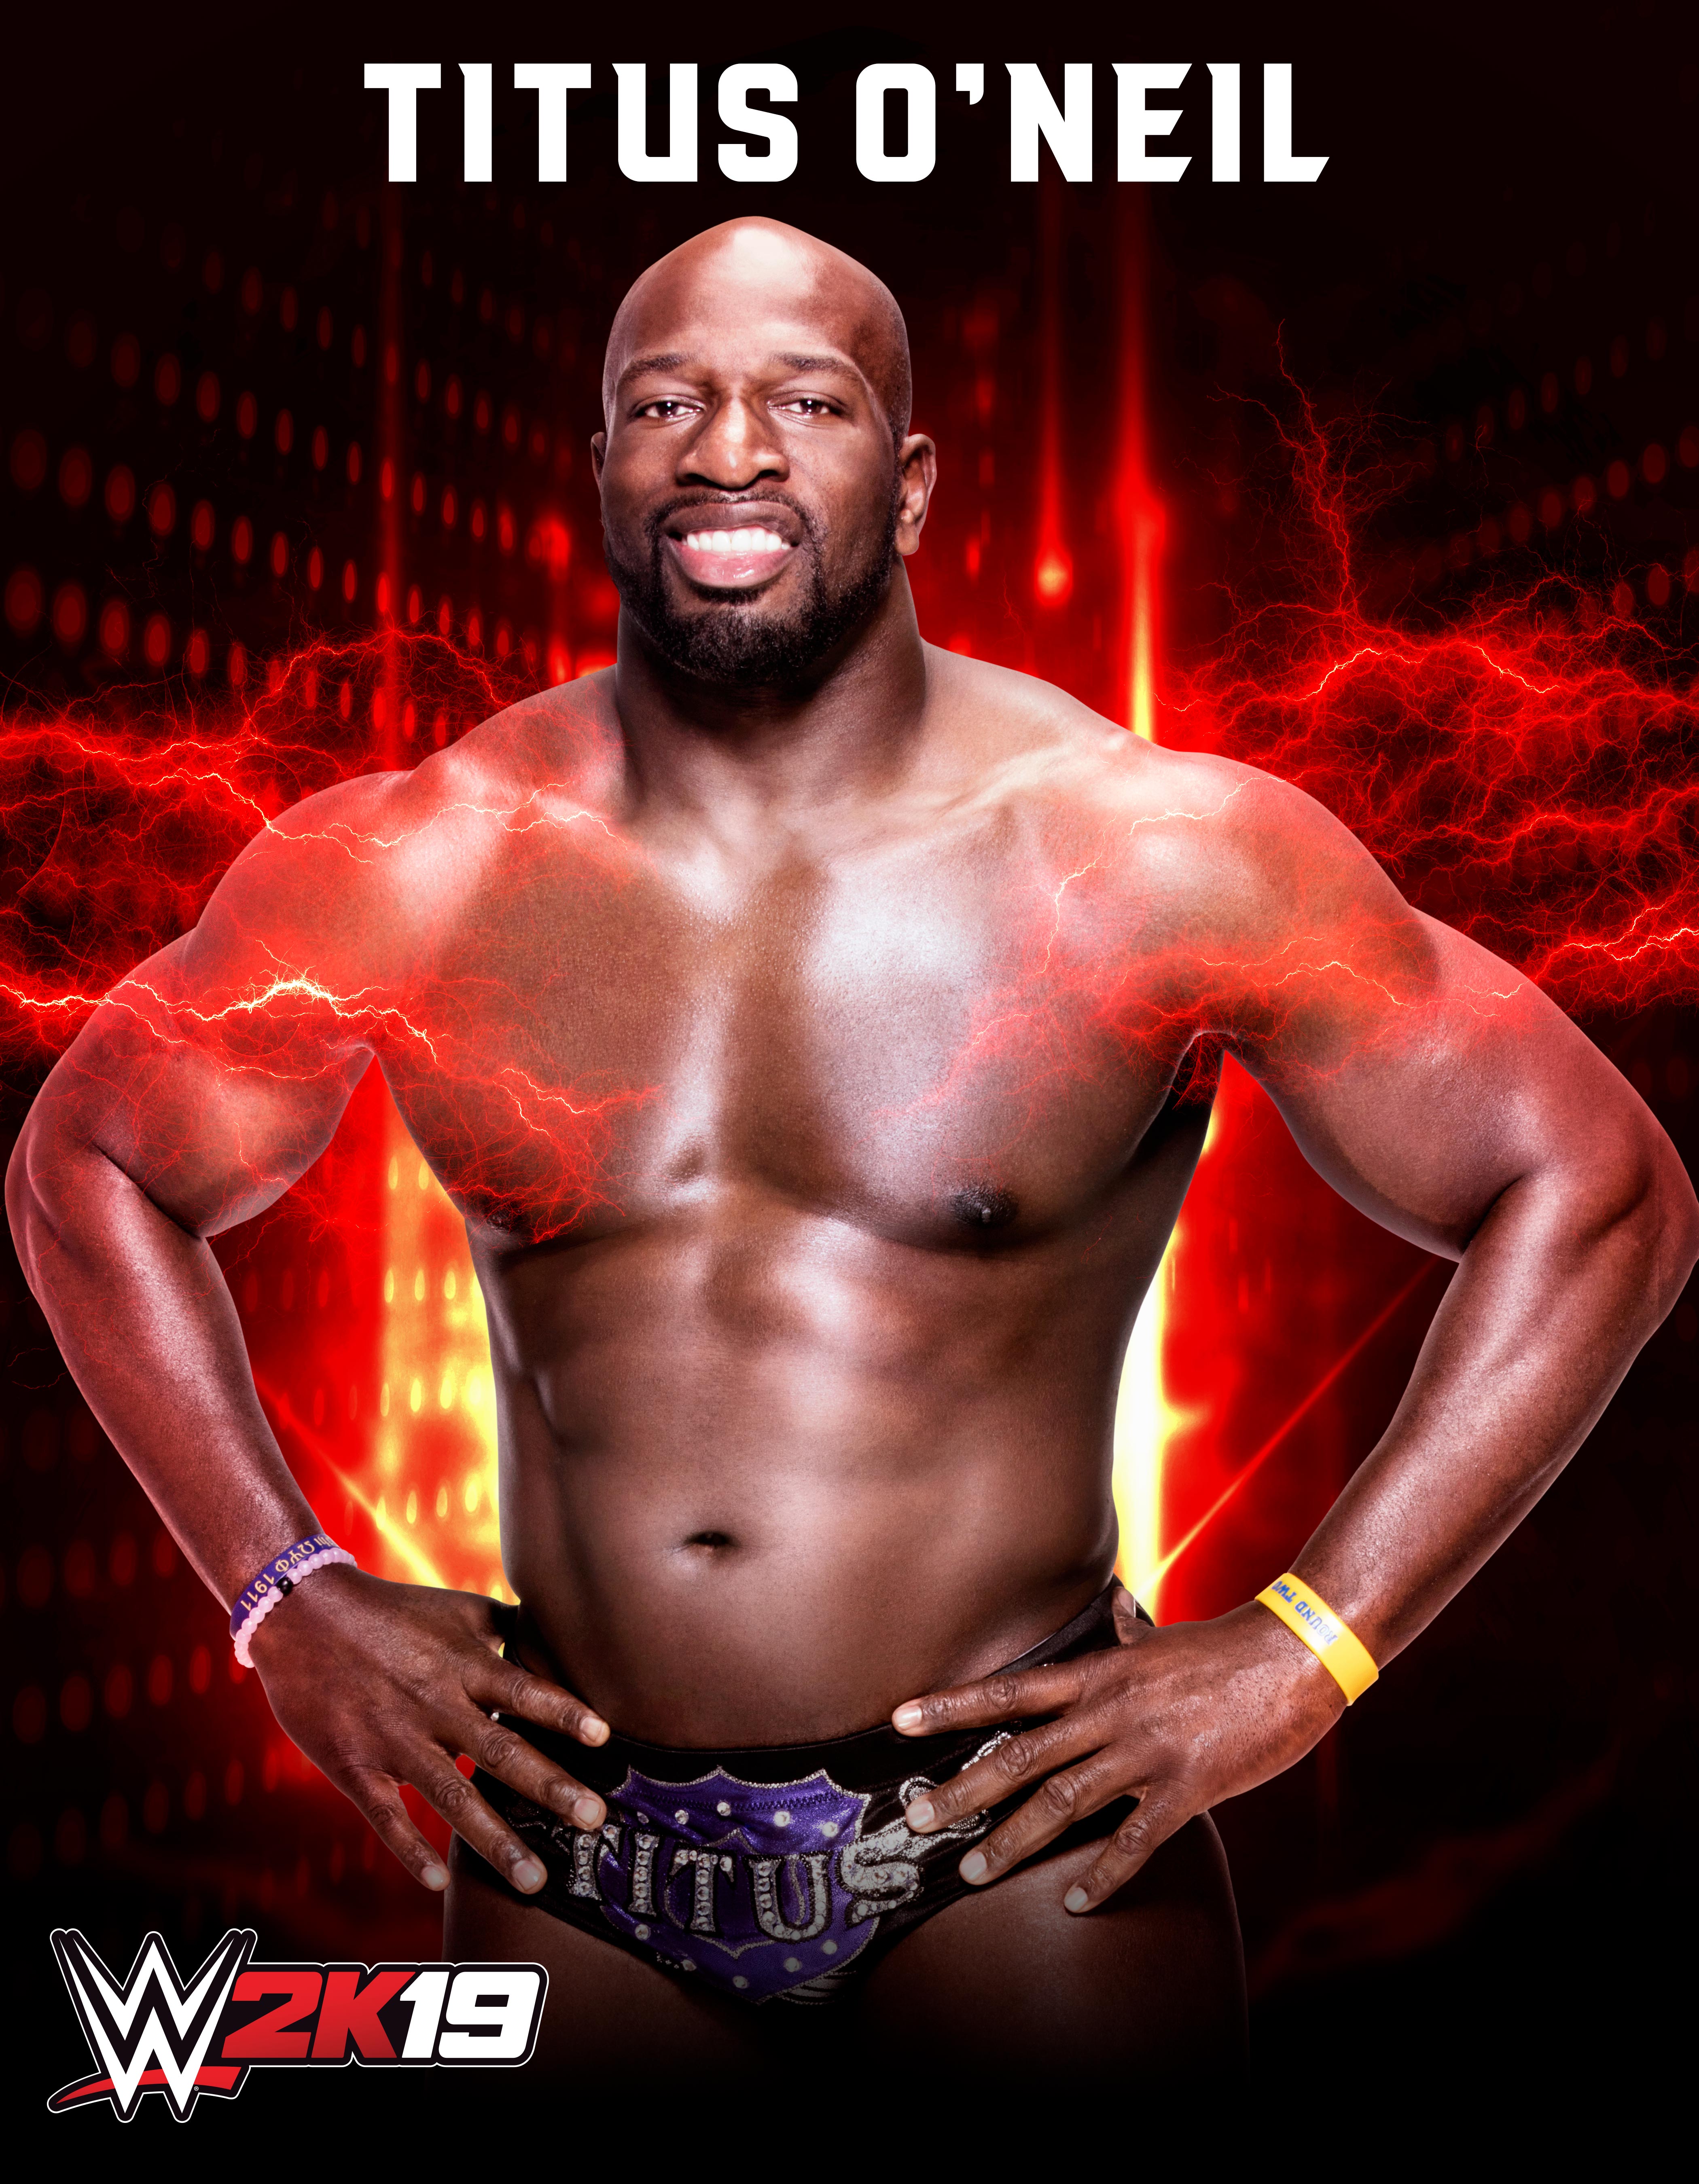 Wwe2k19 Roster Titus Oneil